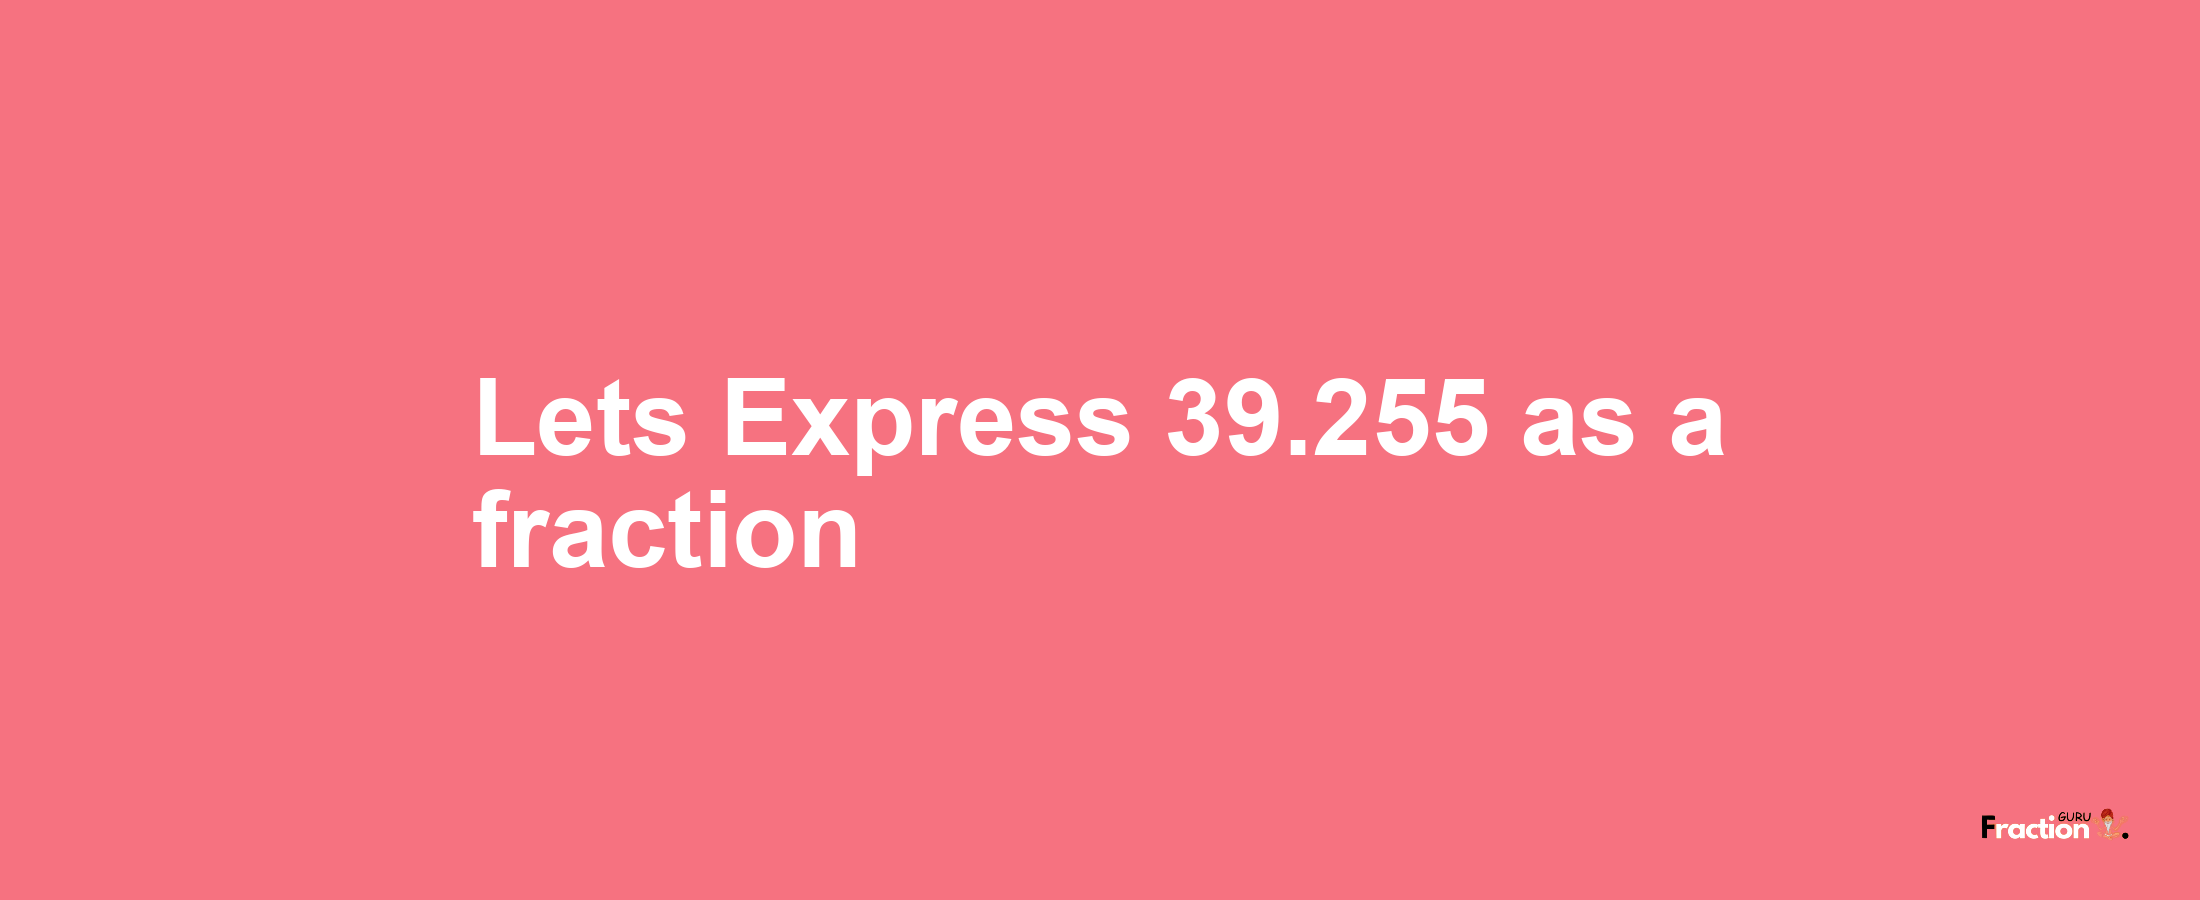 Lets Express 39.255 as afraction